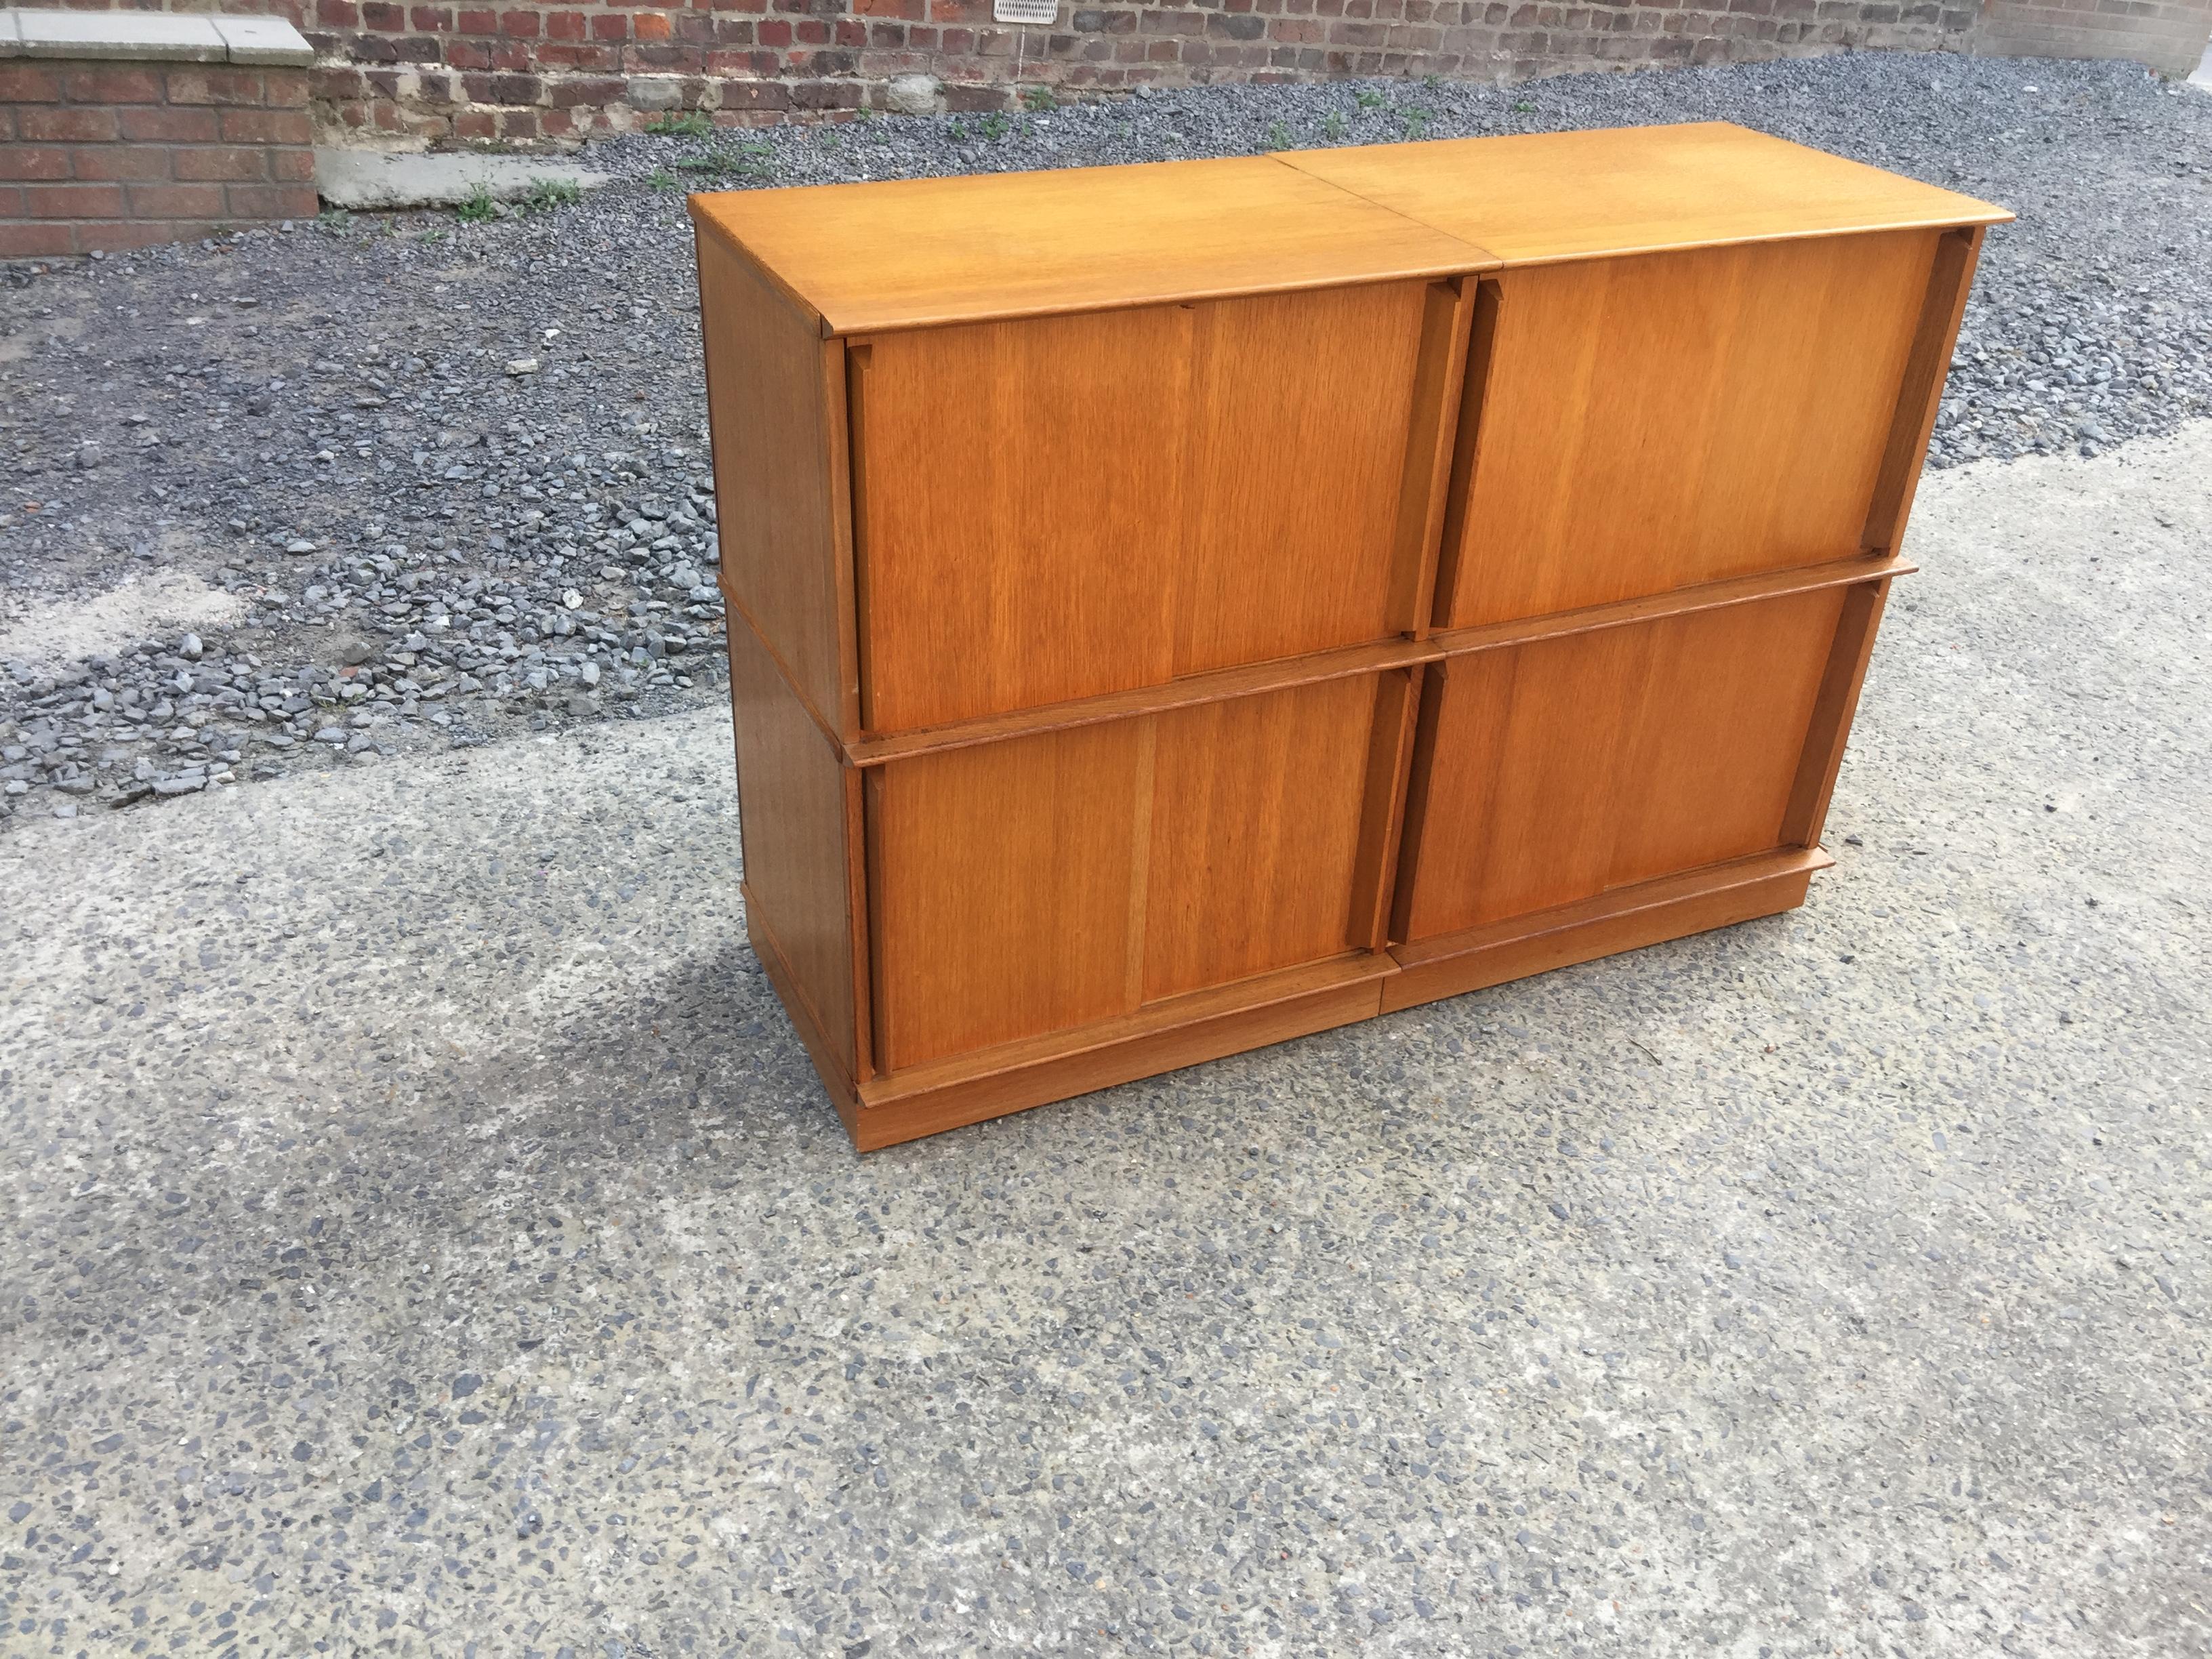 Oak small bookcase with sliding doors by Oscar, circa 1960
furniture can be divided into two parts.